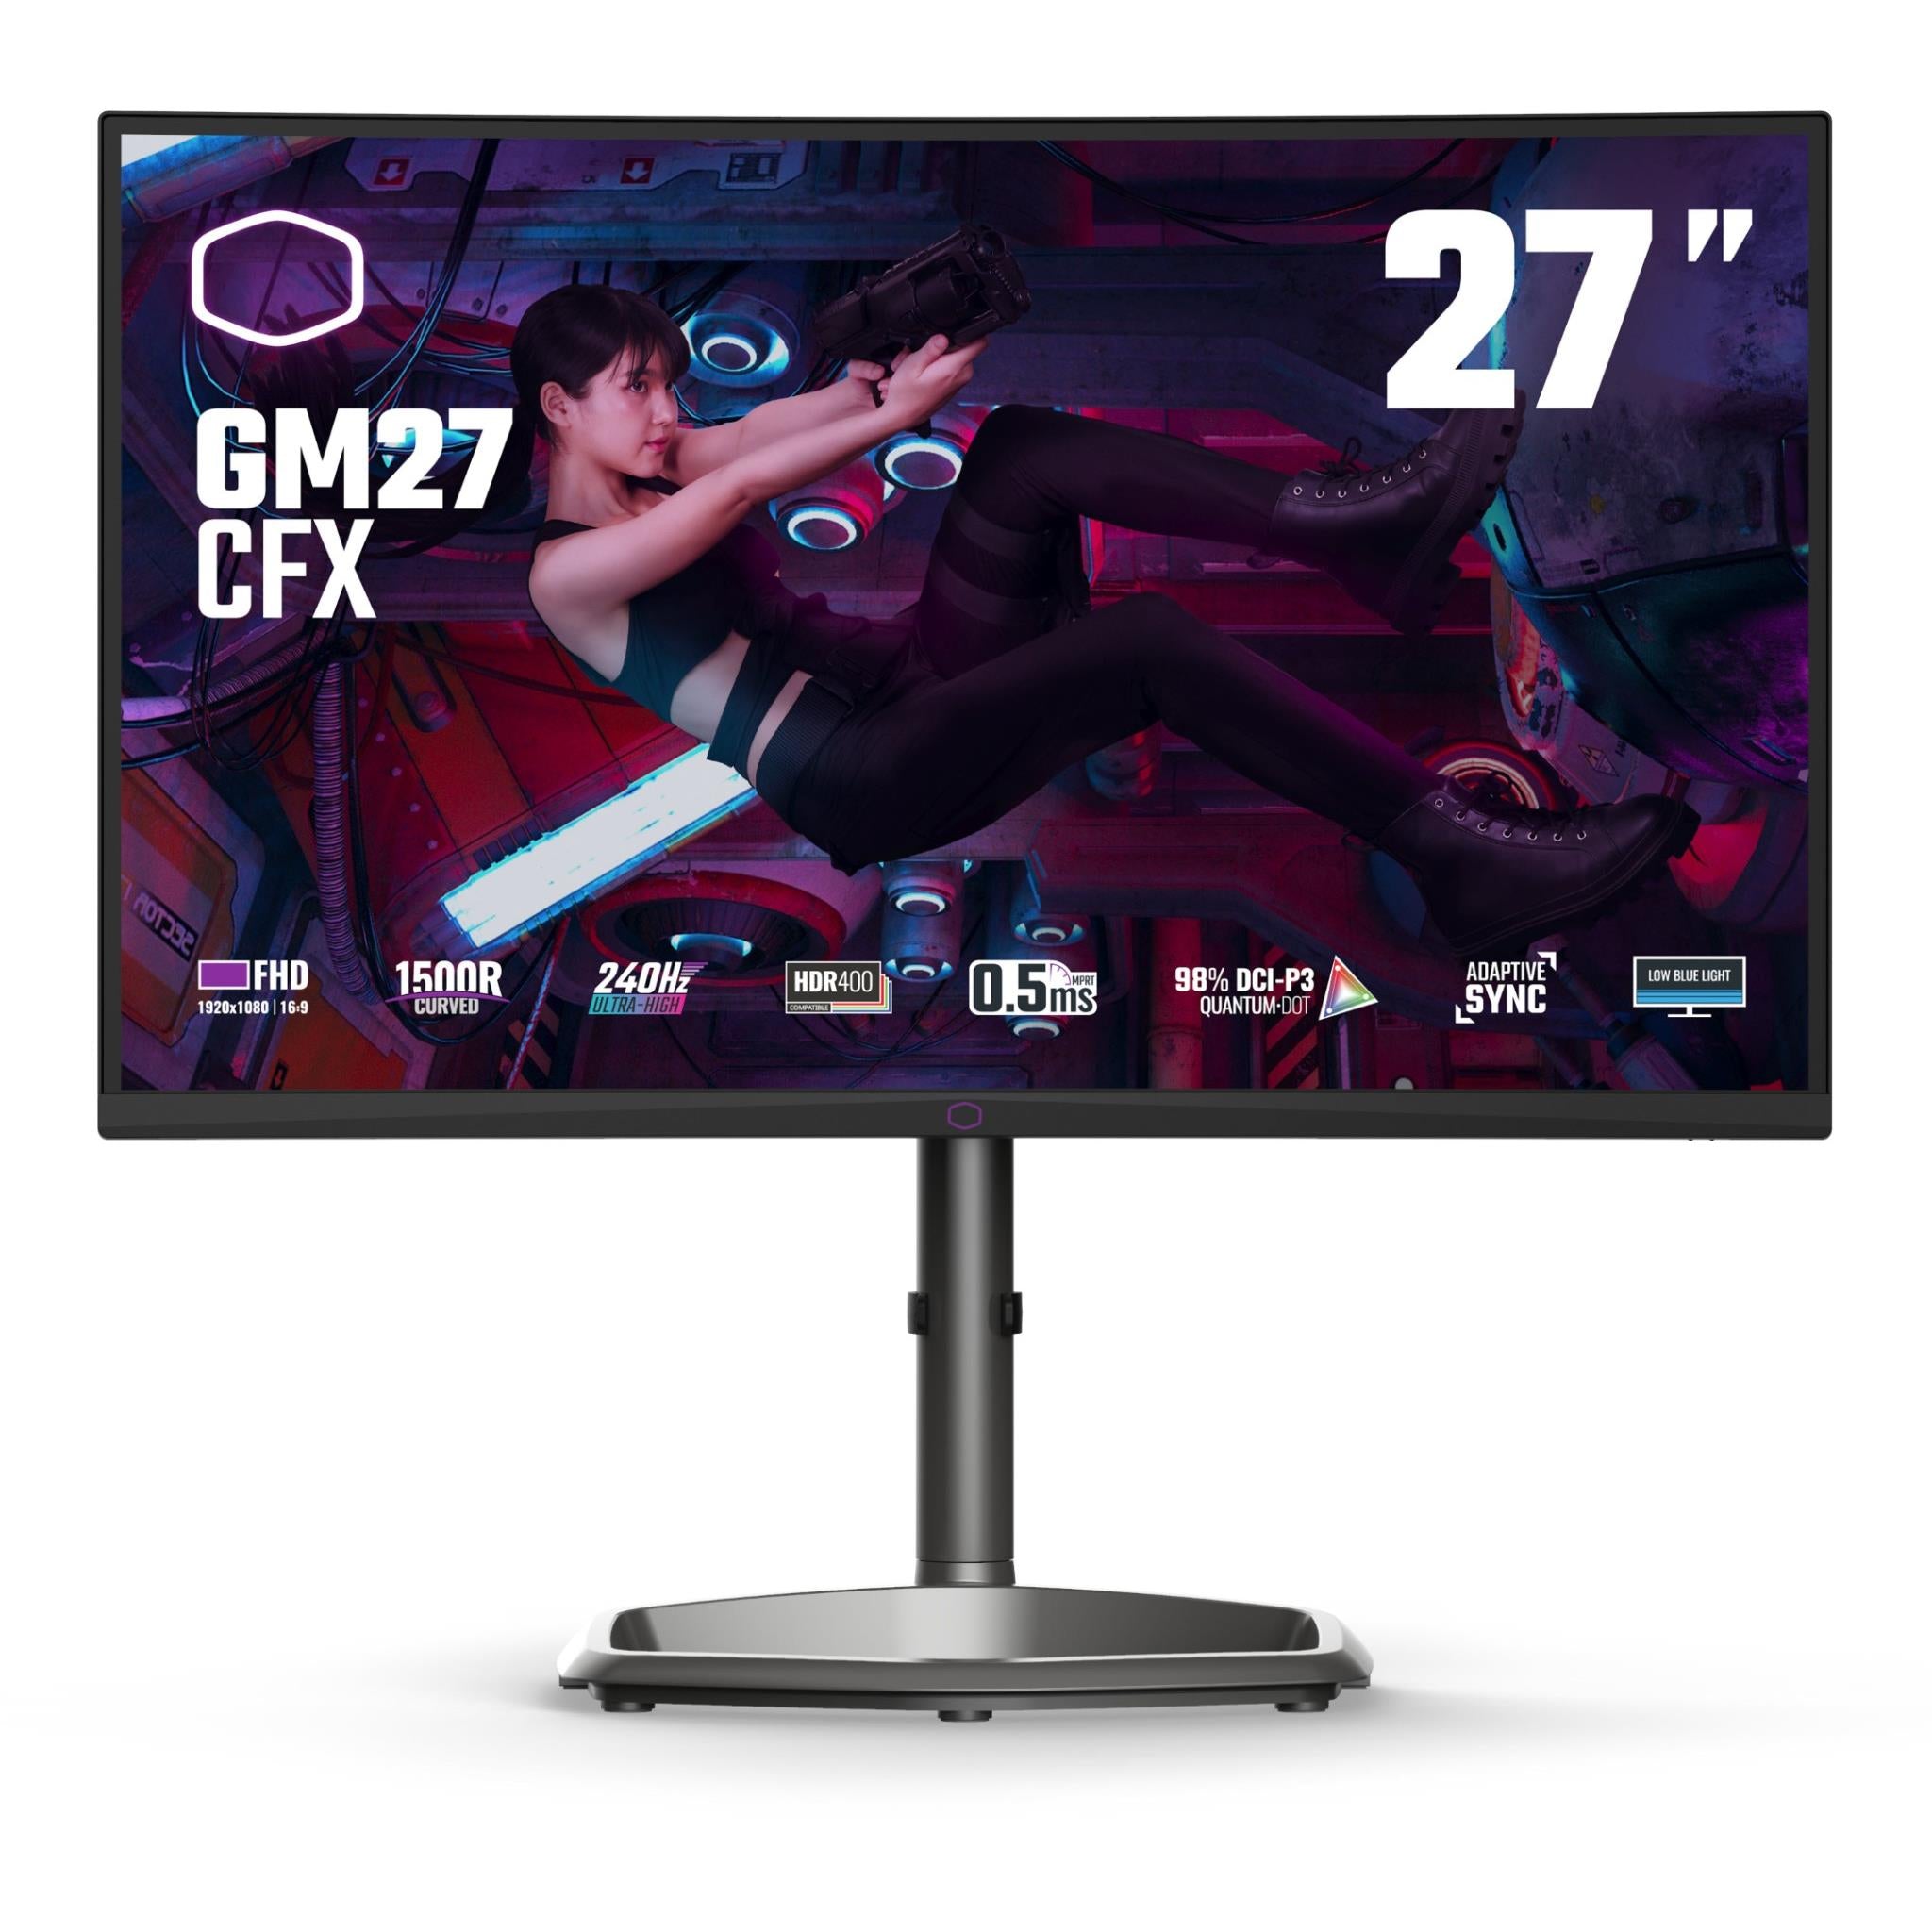 cooler master gm27-cfx 27" fhd 240hz curved gaming monitor